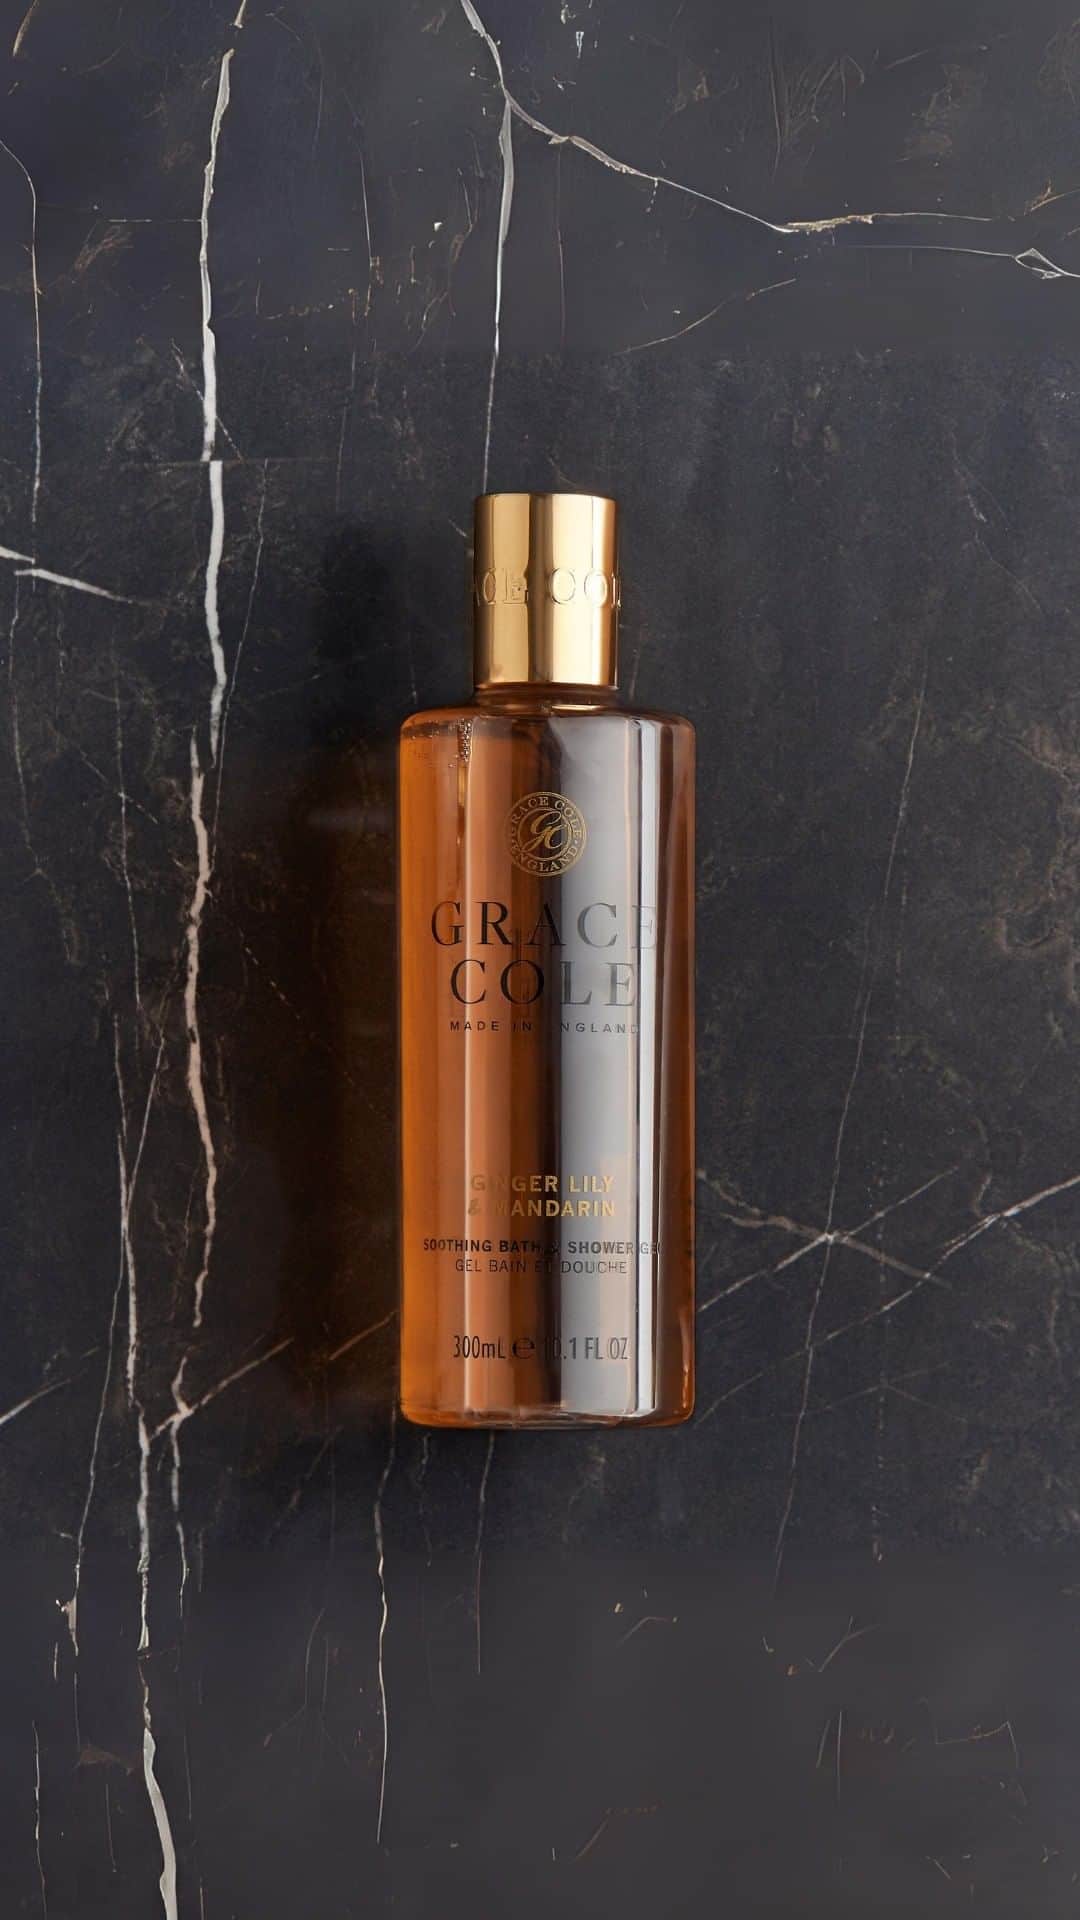 Grace Coleのインスタグラム：「Elevate your bathing rituals to a whole new level of serenity 🛀⁠ ⁠ Our soothing Bath & Shower Gel in Ginger Lily & Mandarin will leave you feeling fresh and cleansed with its mild yet effective formula...⁠ ⁠ Powerful antioxidants from Ginger Root and Mandarin extracts combined with the moisturizing properties of Aloe Vera Leaf Juice will hydrate and soothe skin 🥰⁠ ⁠ Enhance the sensual and relaxing scent of refreshing Mandarin and aromatic Bergamot even further with our hand-poured unique wax blend candles!⁠ ⁠ 🎥 @ourhouse.at.53⁠ ⁠ Shop now and get a free White Nectarine & Pear candle with orders over £50 🛒」